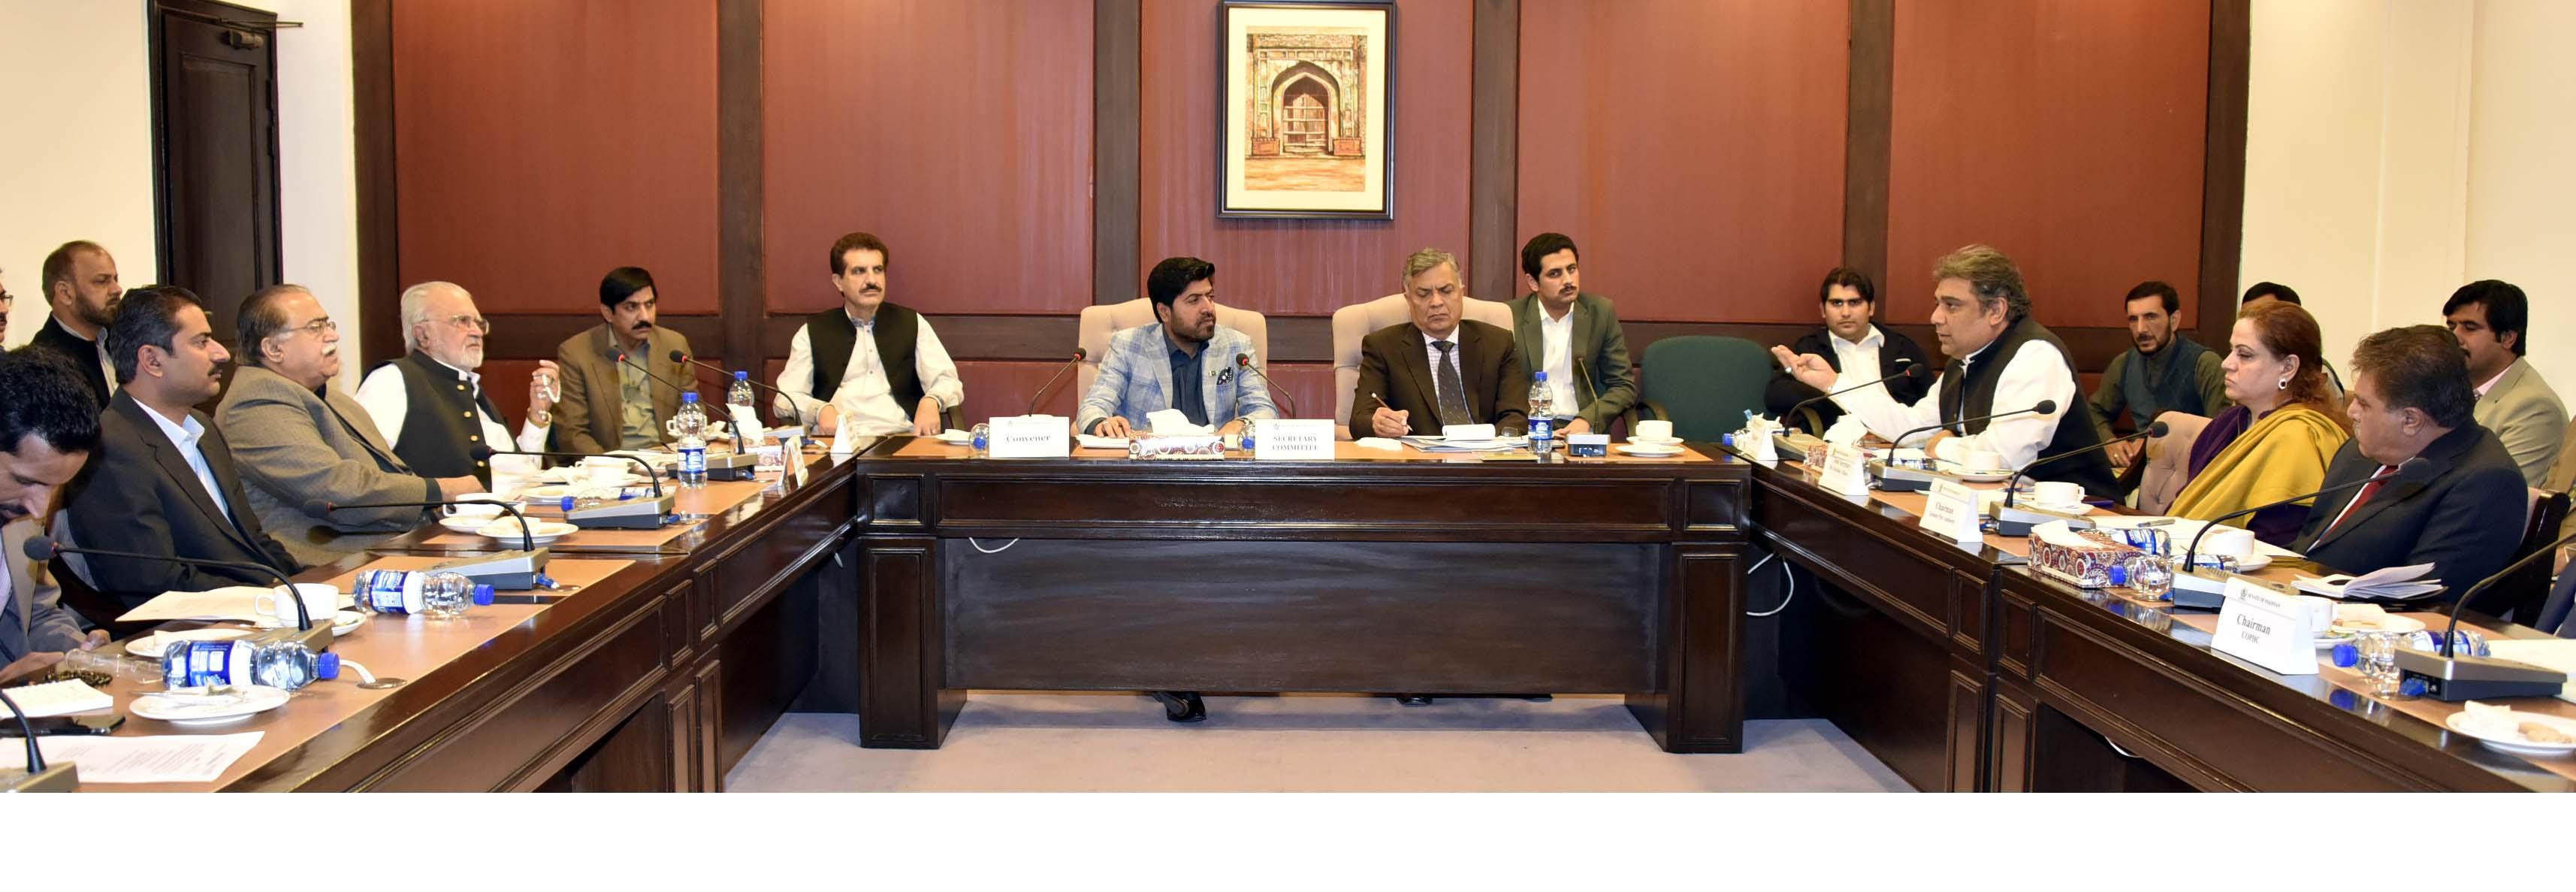 SENATOR KAUDA BABAR, CONVENER SUB-COMMITTEE OF THE SENATE STANDING COMMITTEE ON MARITIME AFFAIRS PRESIDING OVER A MEETING OF THE COMMITTEE AT PAKISTAN INSTITUTE OF PARLIAMENTARY SERVICES (PIPS),  ISLAMABAD ON NOVEMBER 14, 2018.